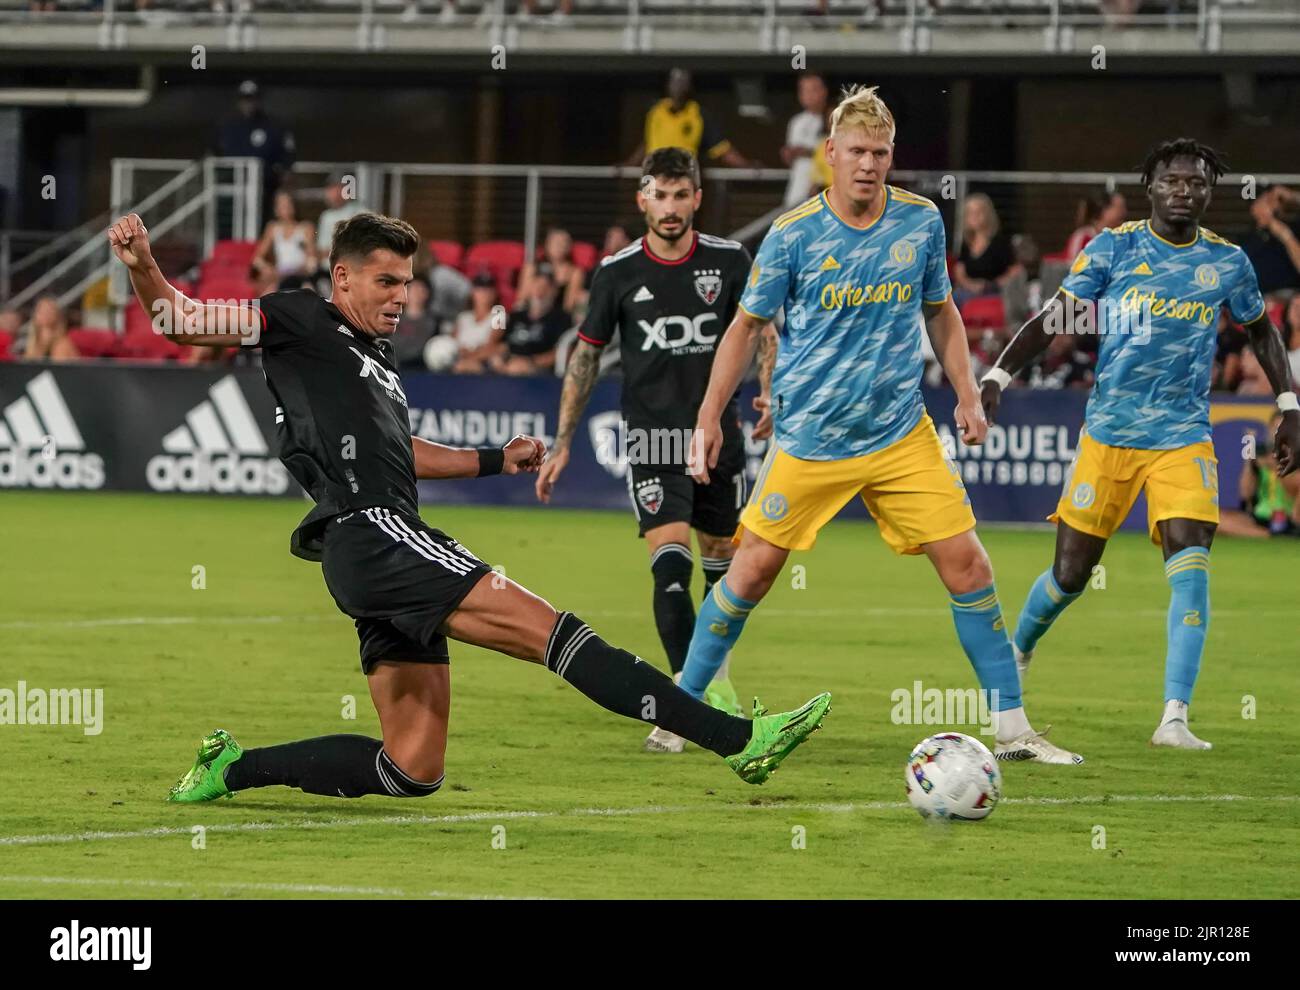 WASHINGTON, DC, USA - 20 AUGUST 2022: D.C. United forwardMi Miguel Barry (22) pushes the ball forward during a MLS match between D.C United and the Philadelphia Union on August 20, 2022, at Audi Field, in Washington, DC. (Photo by Tony Quinn-Alamy Live News) Stock Photo